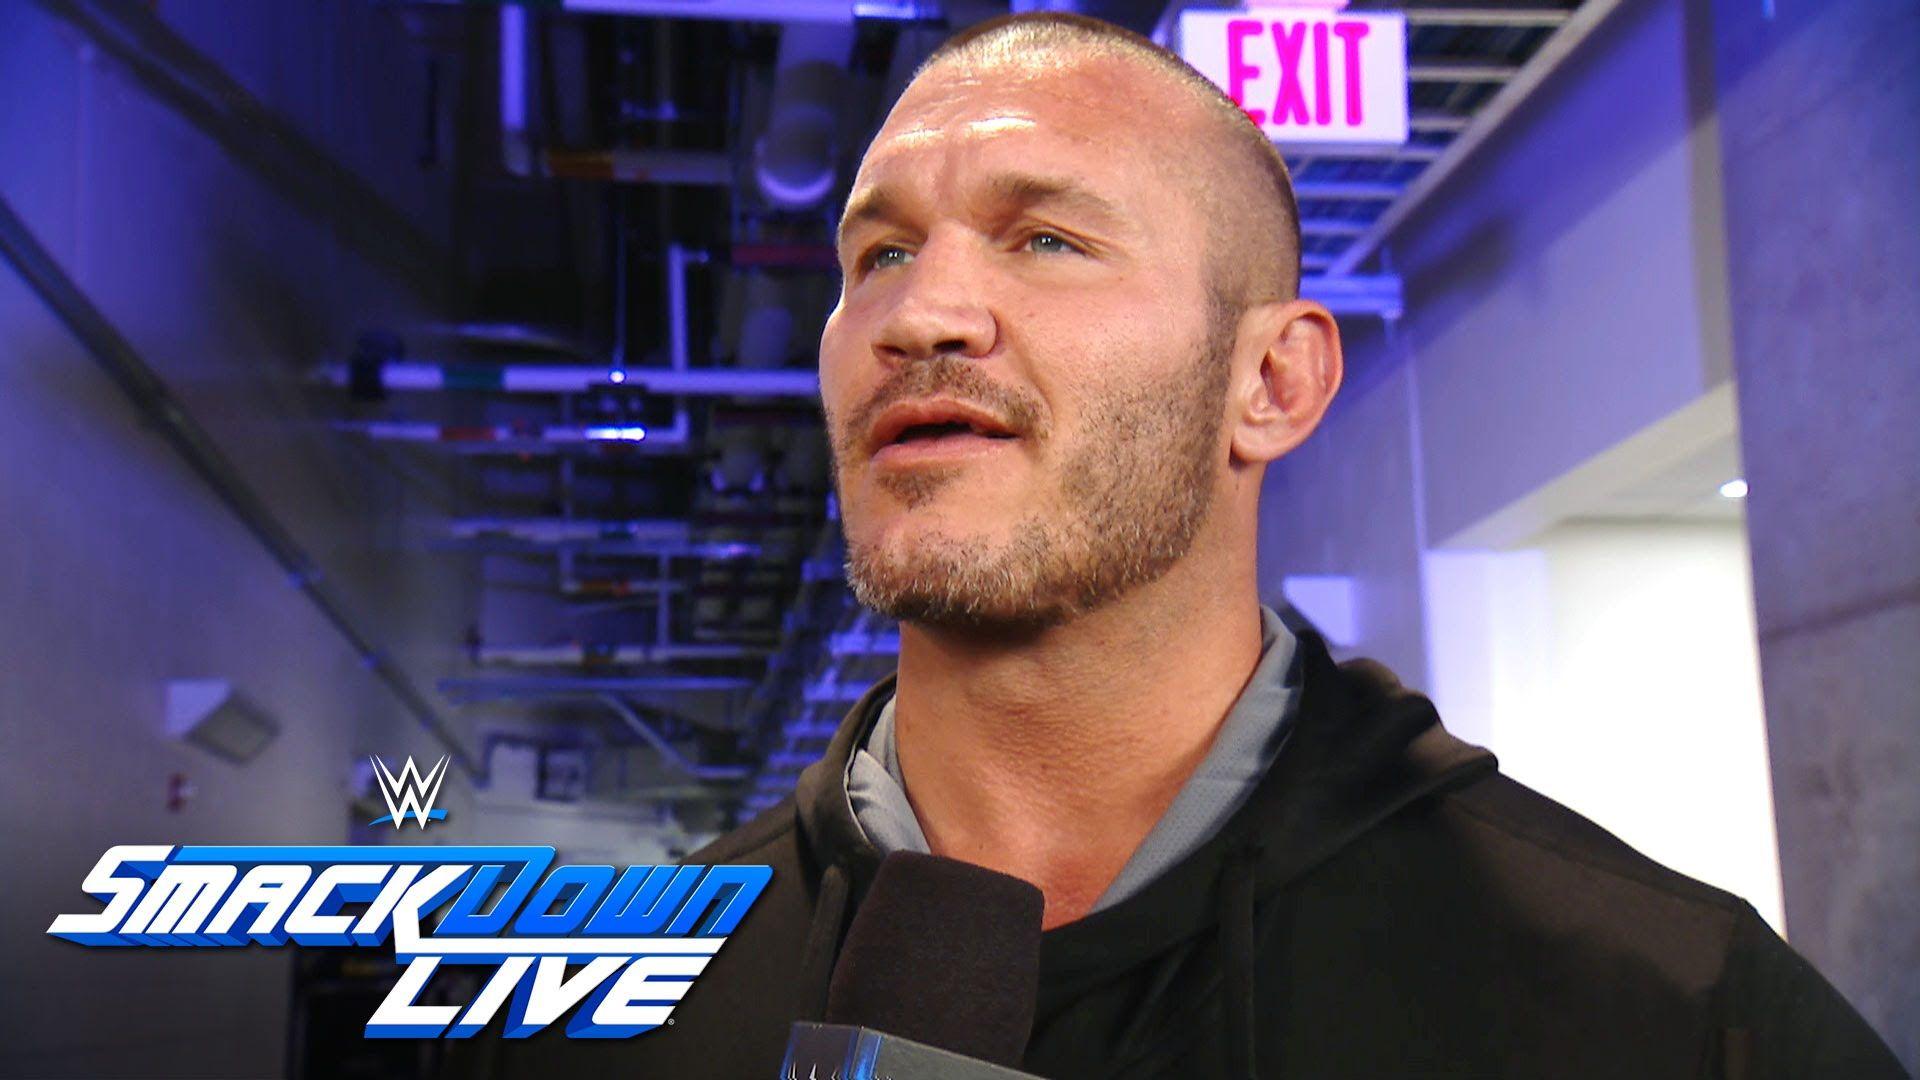 Randy Orton Responds To Fan Criticizing His Promo From Smackdown